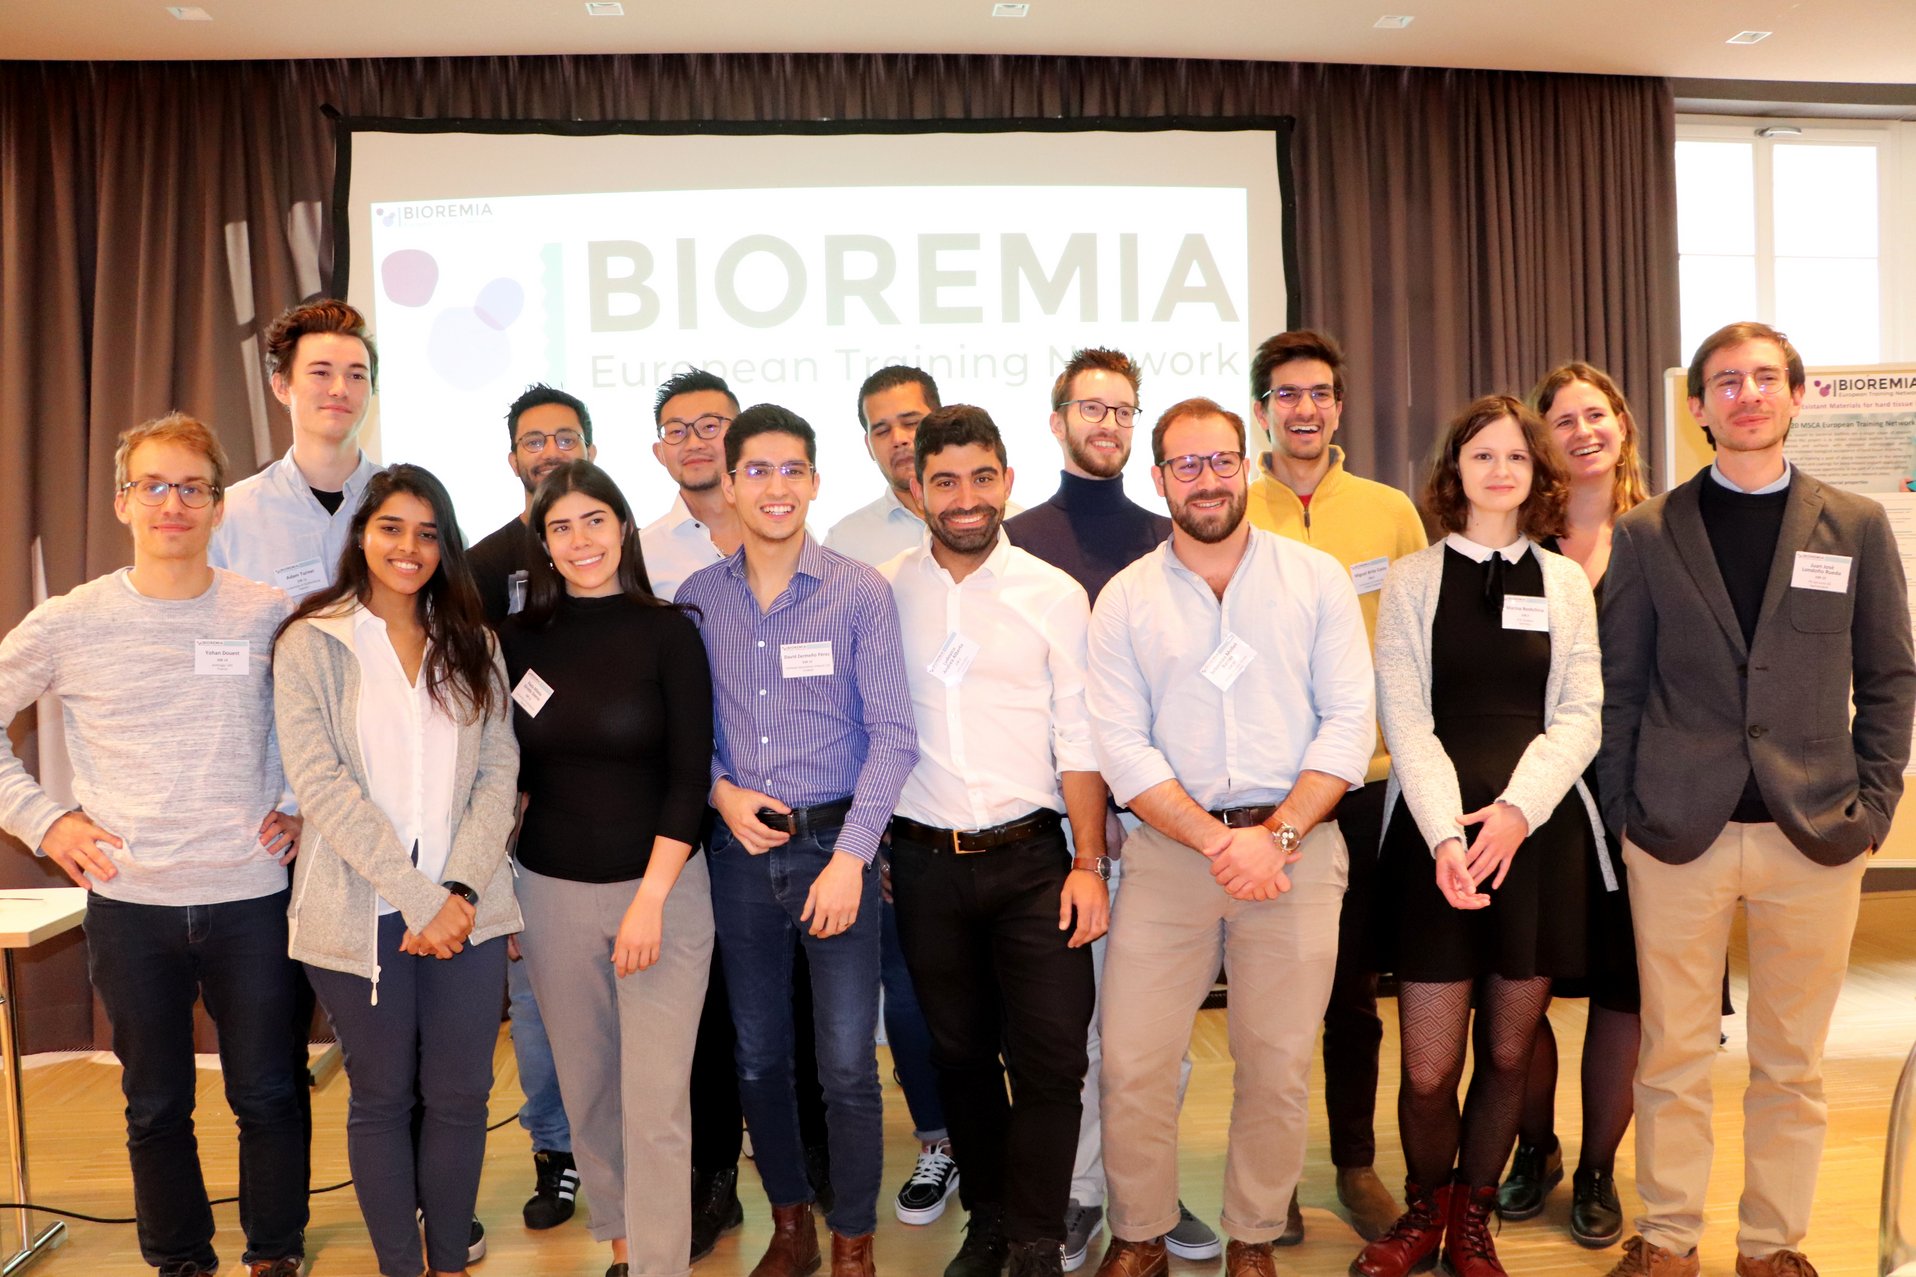 Group photo of BIOREMIA ESRs at the Workshop Science Communication & Presentation Skills in Dresden